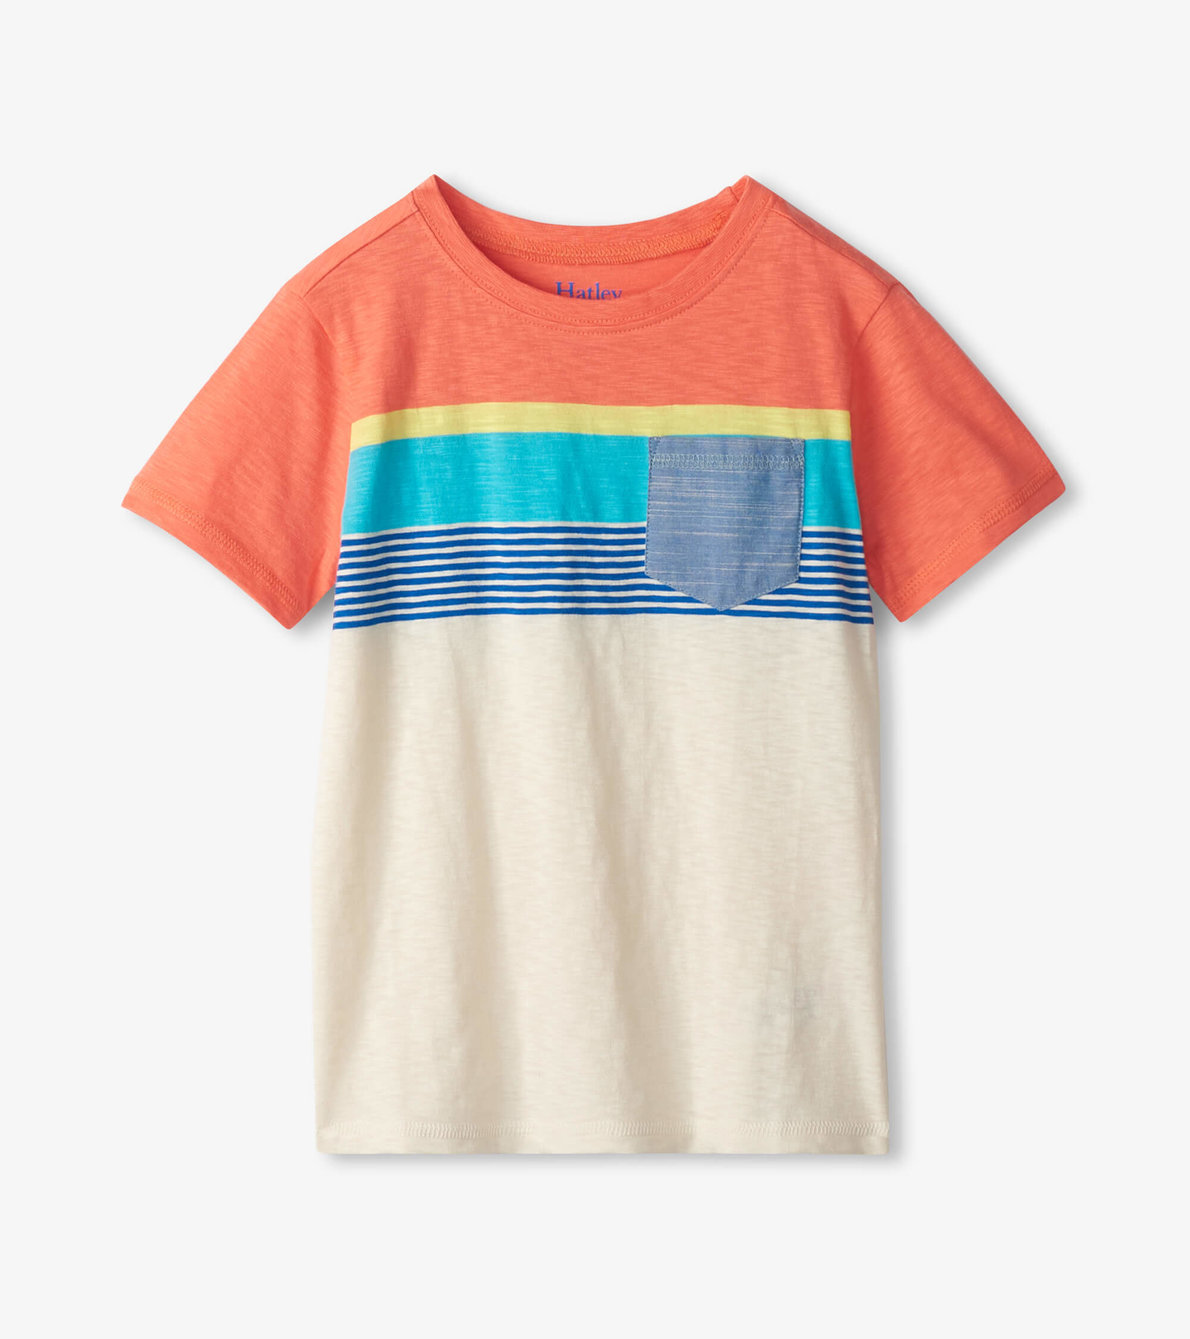 View larger image of Boys Beach Boy Pocket Tee